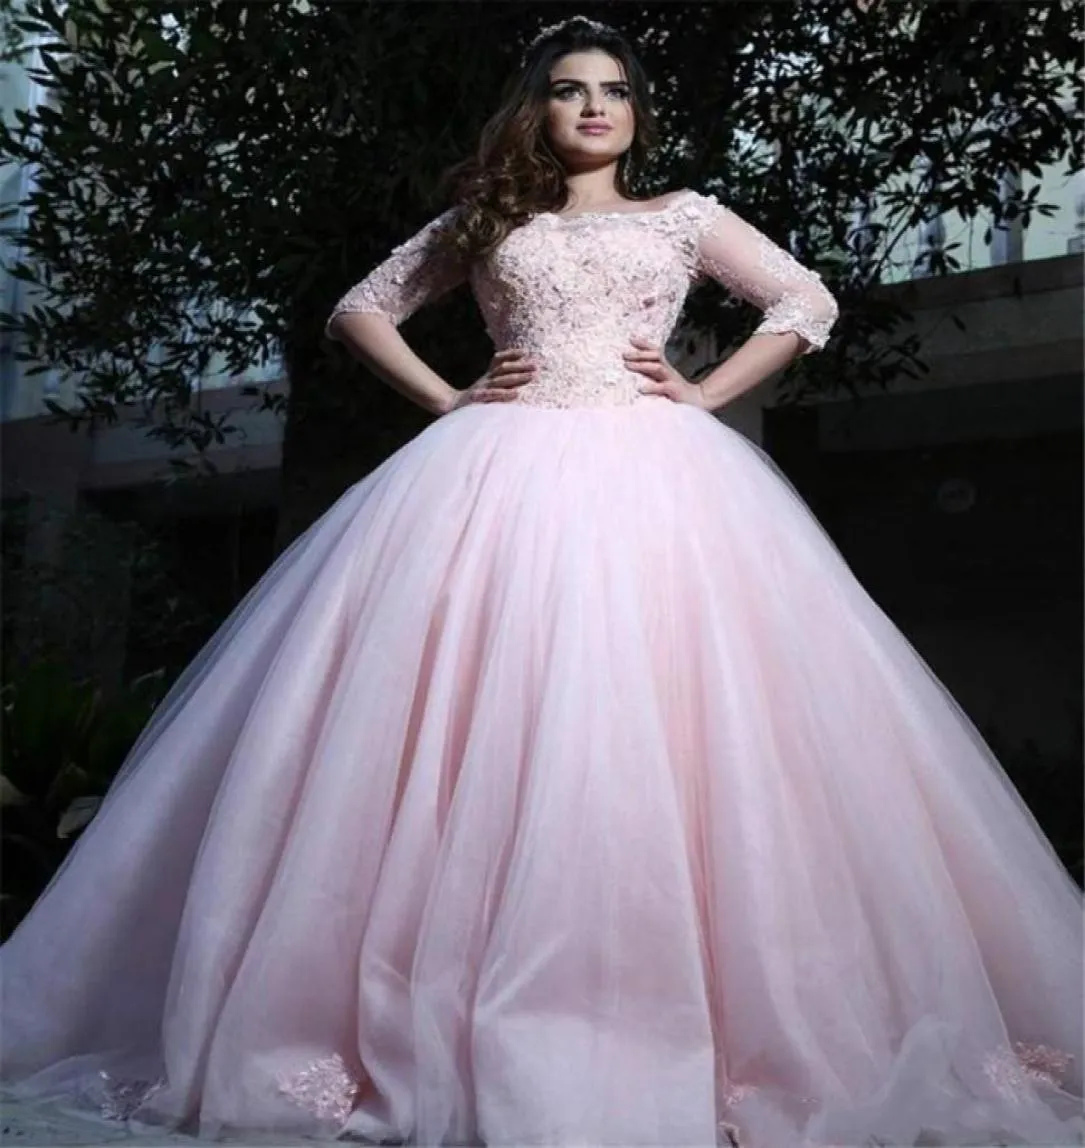 Fashion Pink Gown Quinceanera Dresses Half Sleeve Sheer Neck Lace Applique Tulle Bodice Long Prom Dresses Formal Party Ball Custom8912607